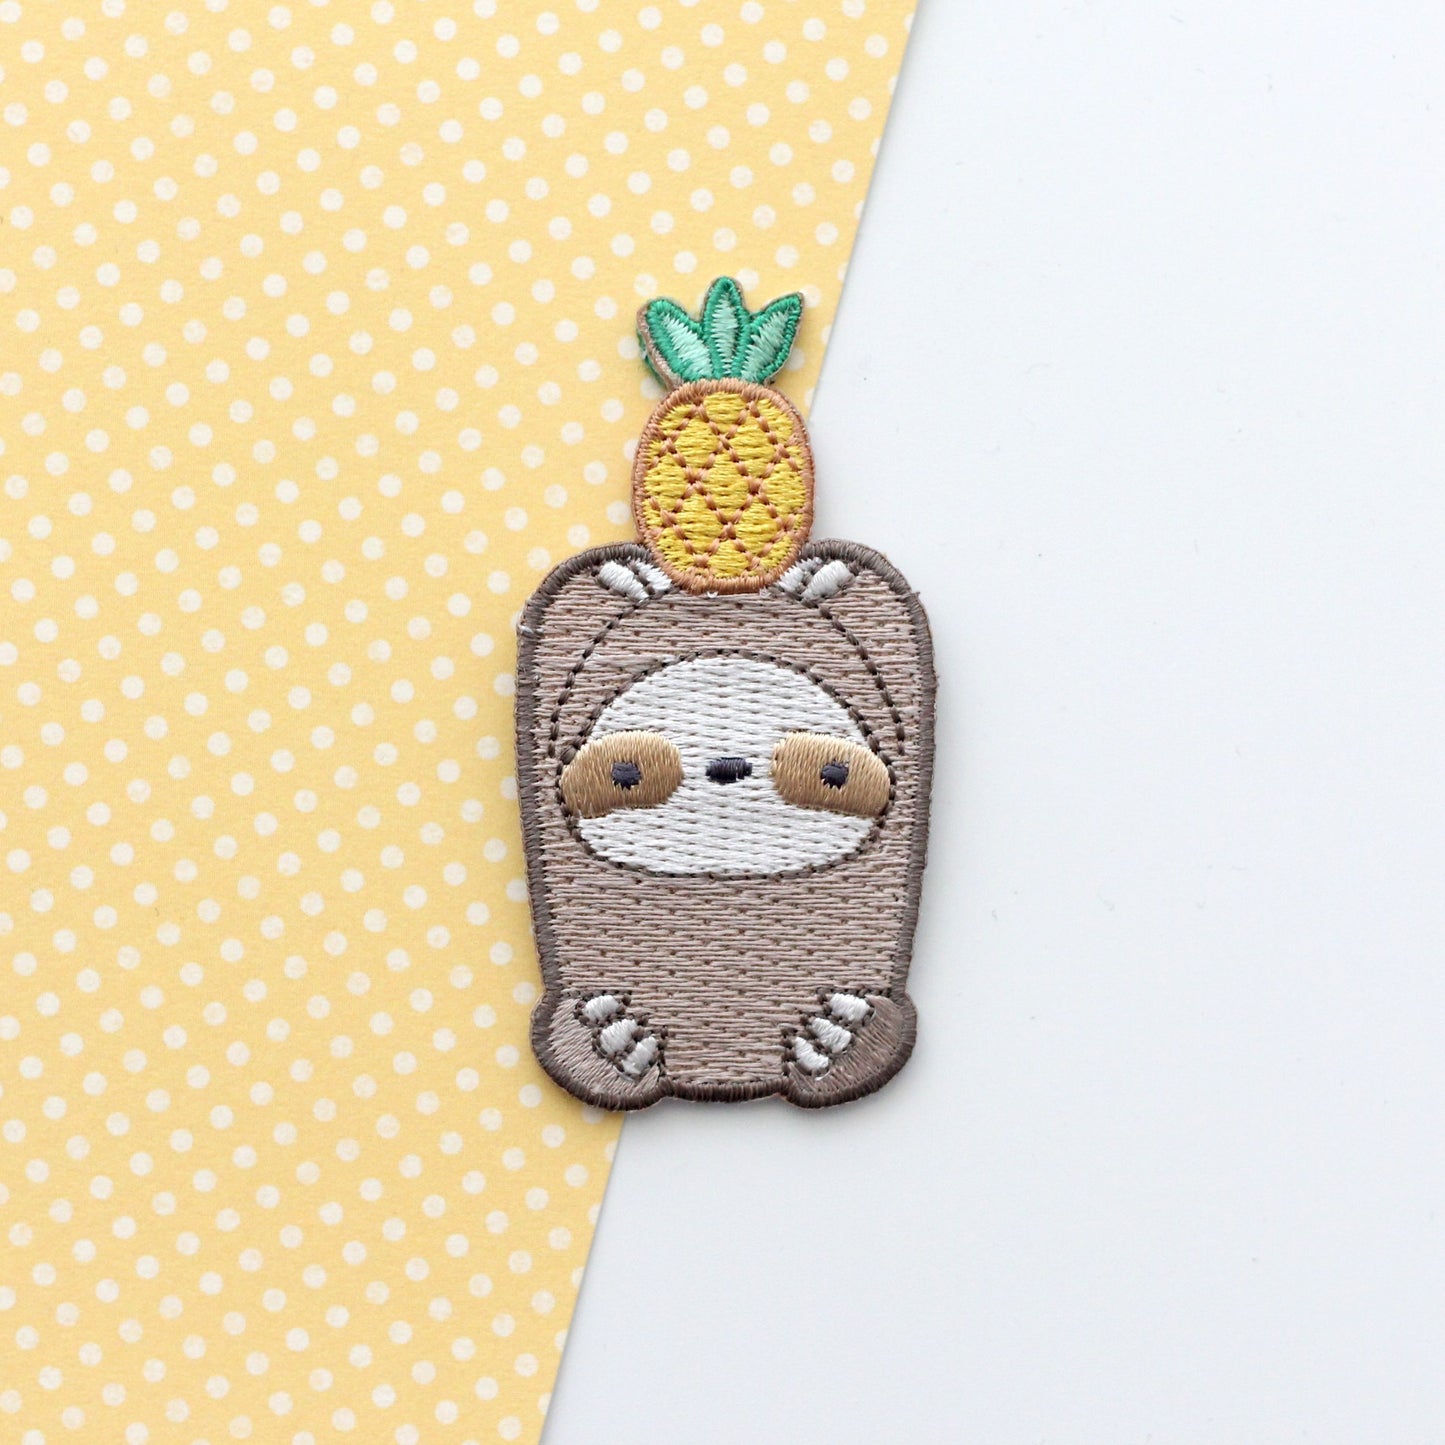 Pineapple Sloth Patches - Sloth Applique Patches: Single (6.5 cm tall)